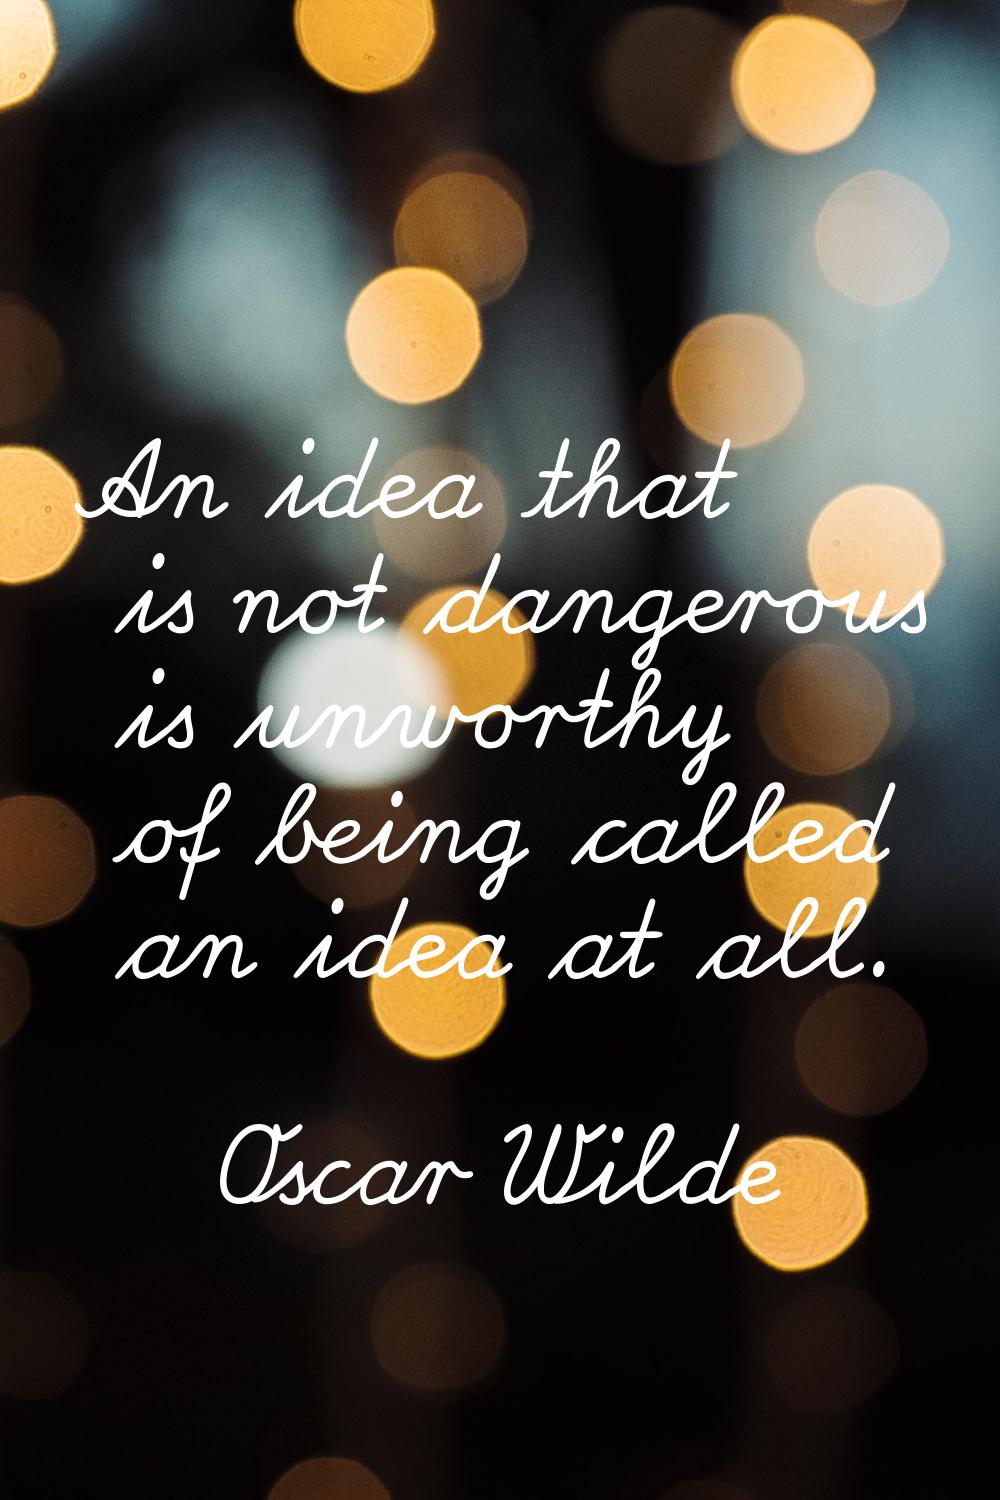 An idea that is not dangerous is unworthy of being called an idea at all.